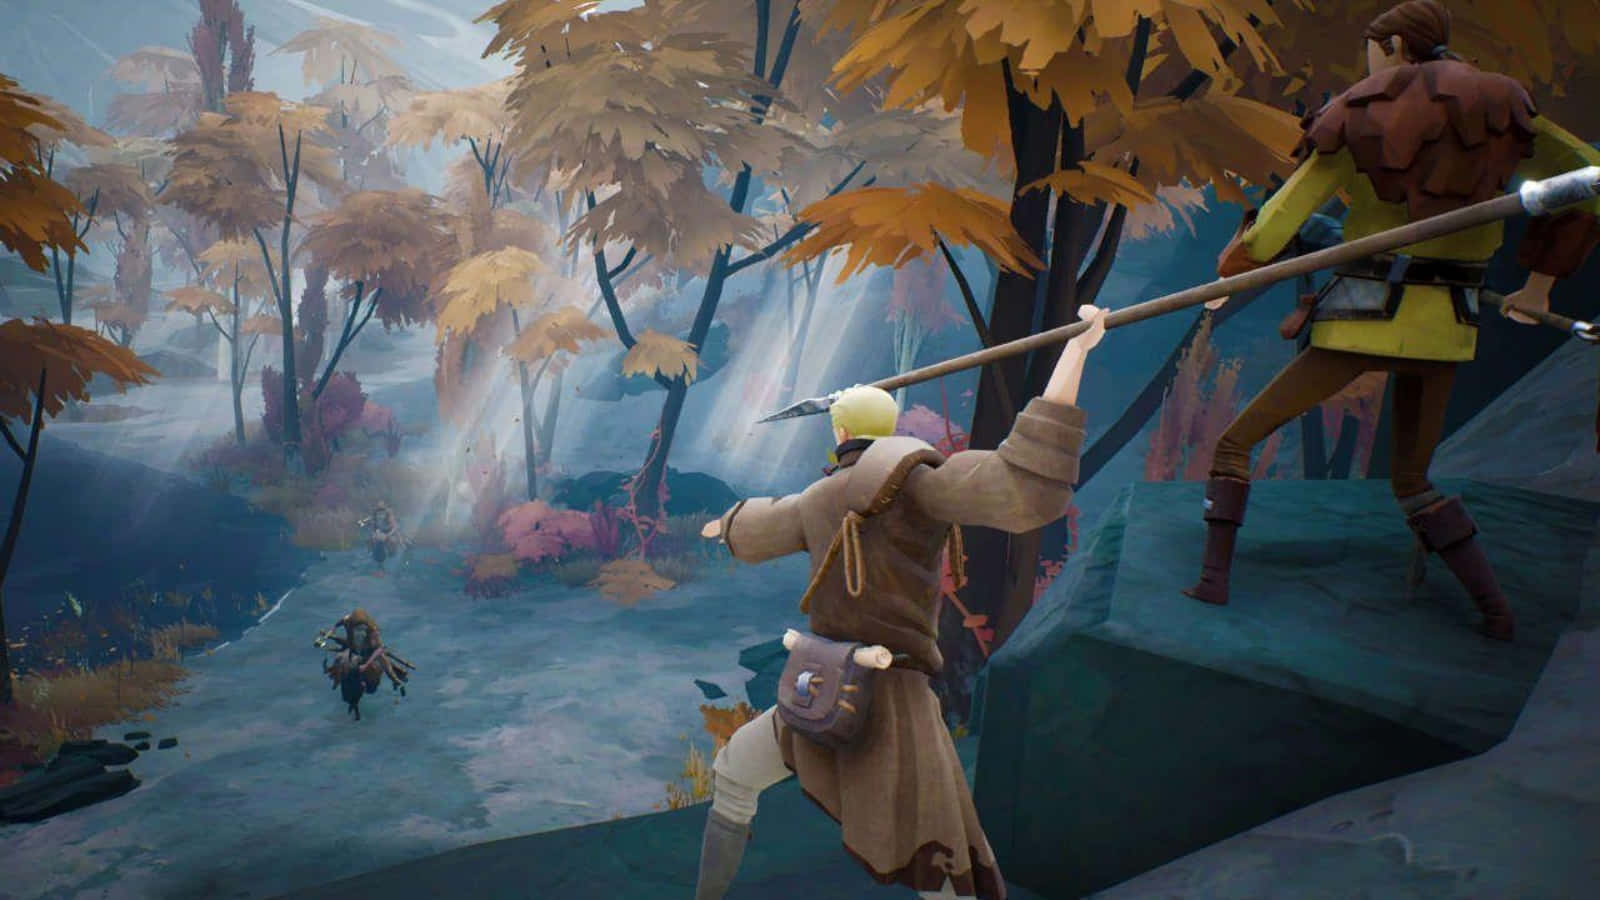 Venture forth and explore the mysterious world of Ashen Wallpaper